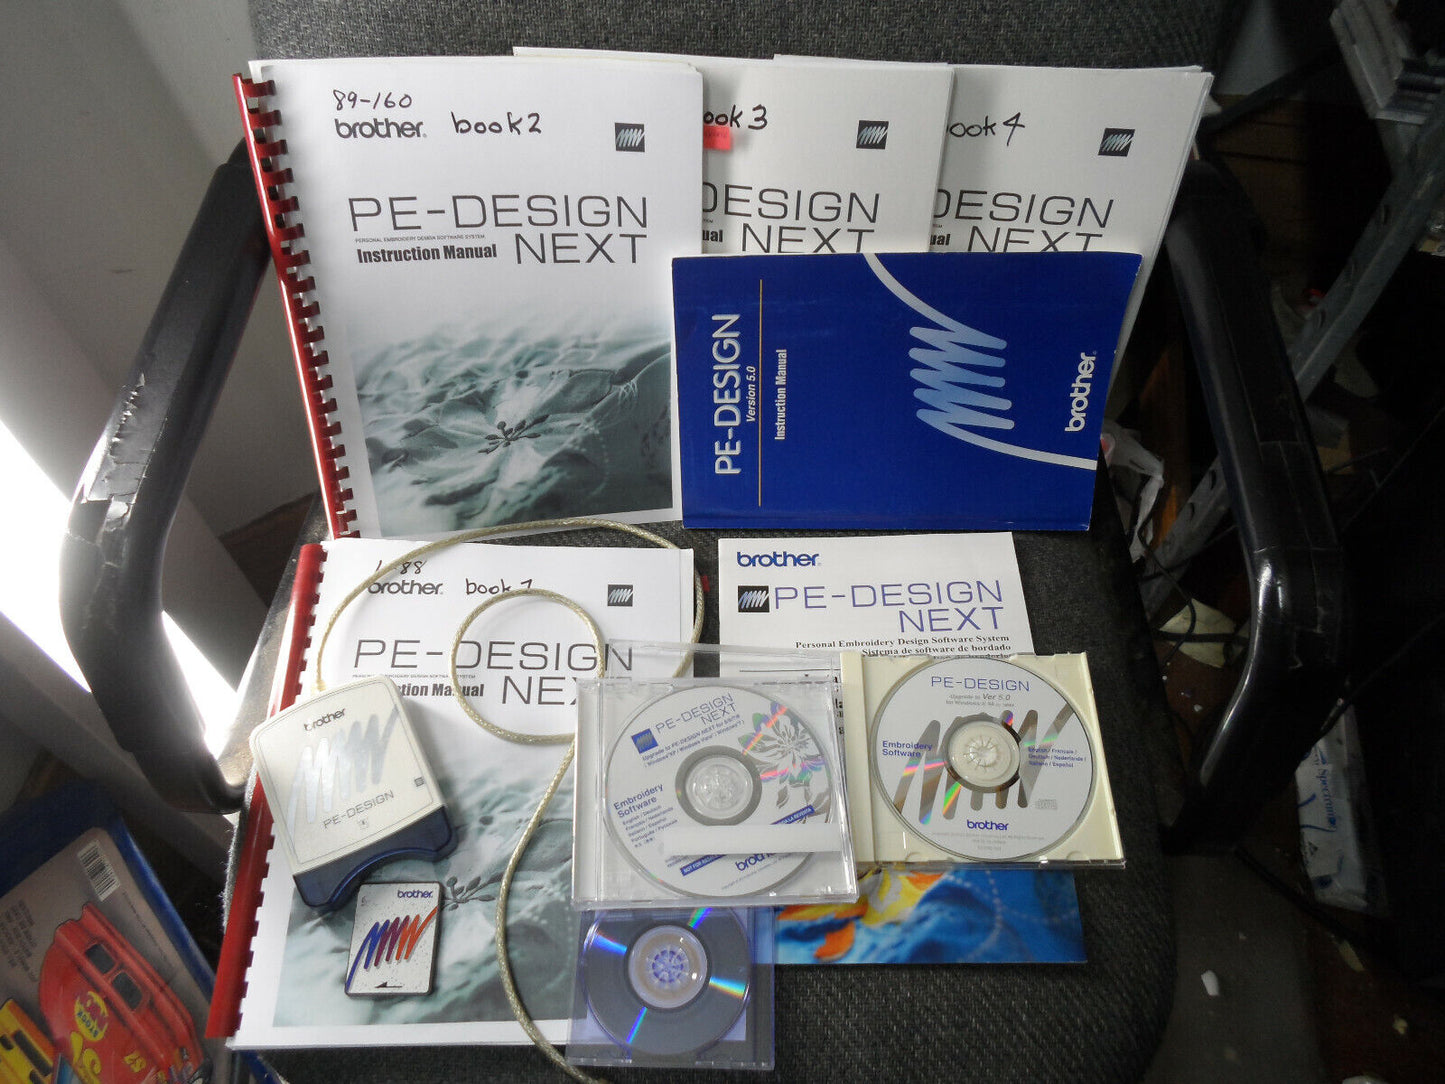 Brother PE-DESIGN 5 & NEXT Personal Embroidery Design Software Upgrade Manuals